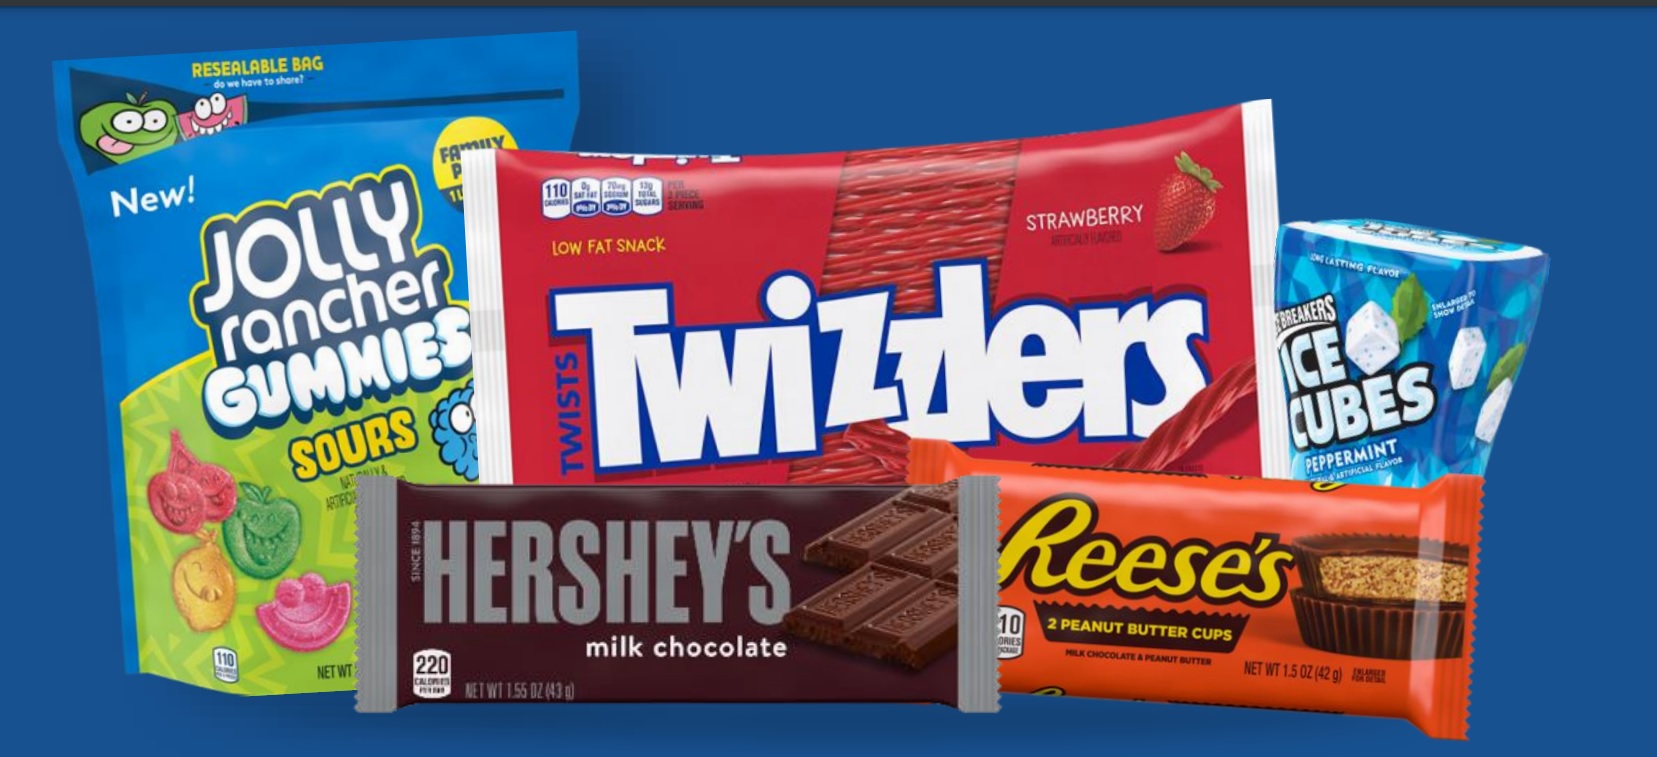 graan Oprecht Einde Hershey expands US confection lead with 'occasion-based' innovation,  personalized marketing